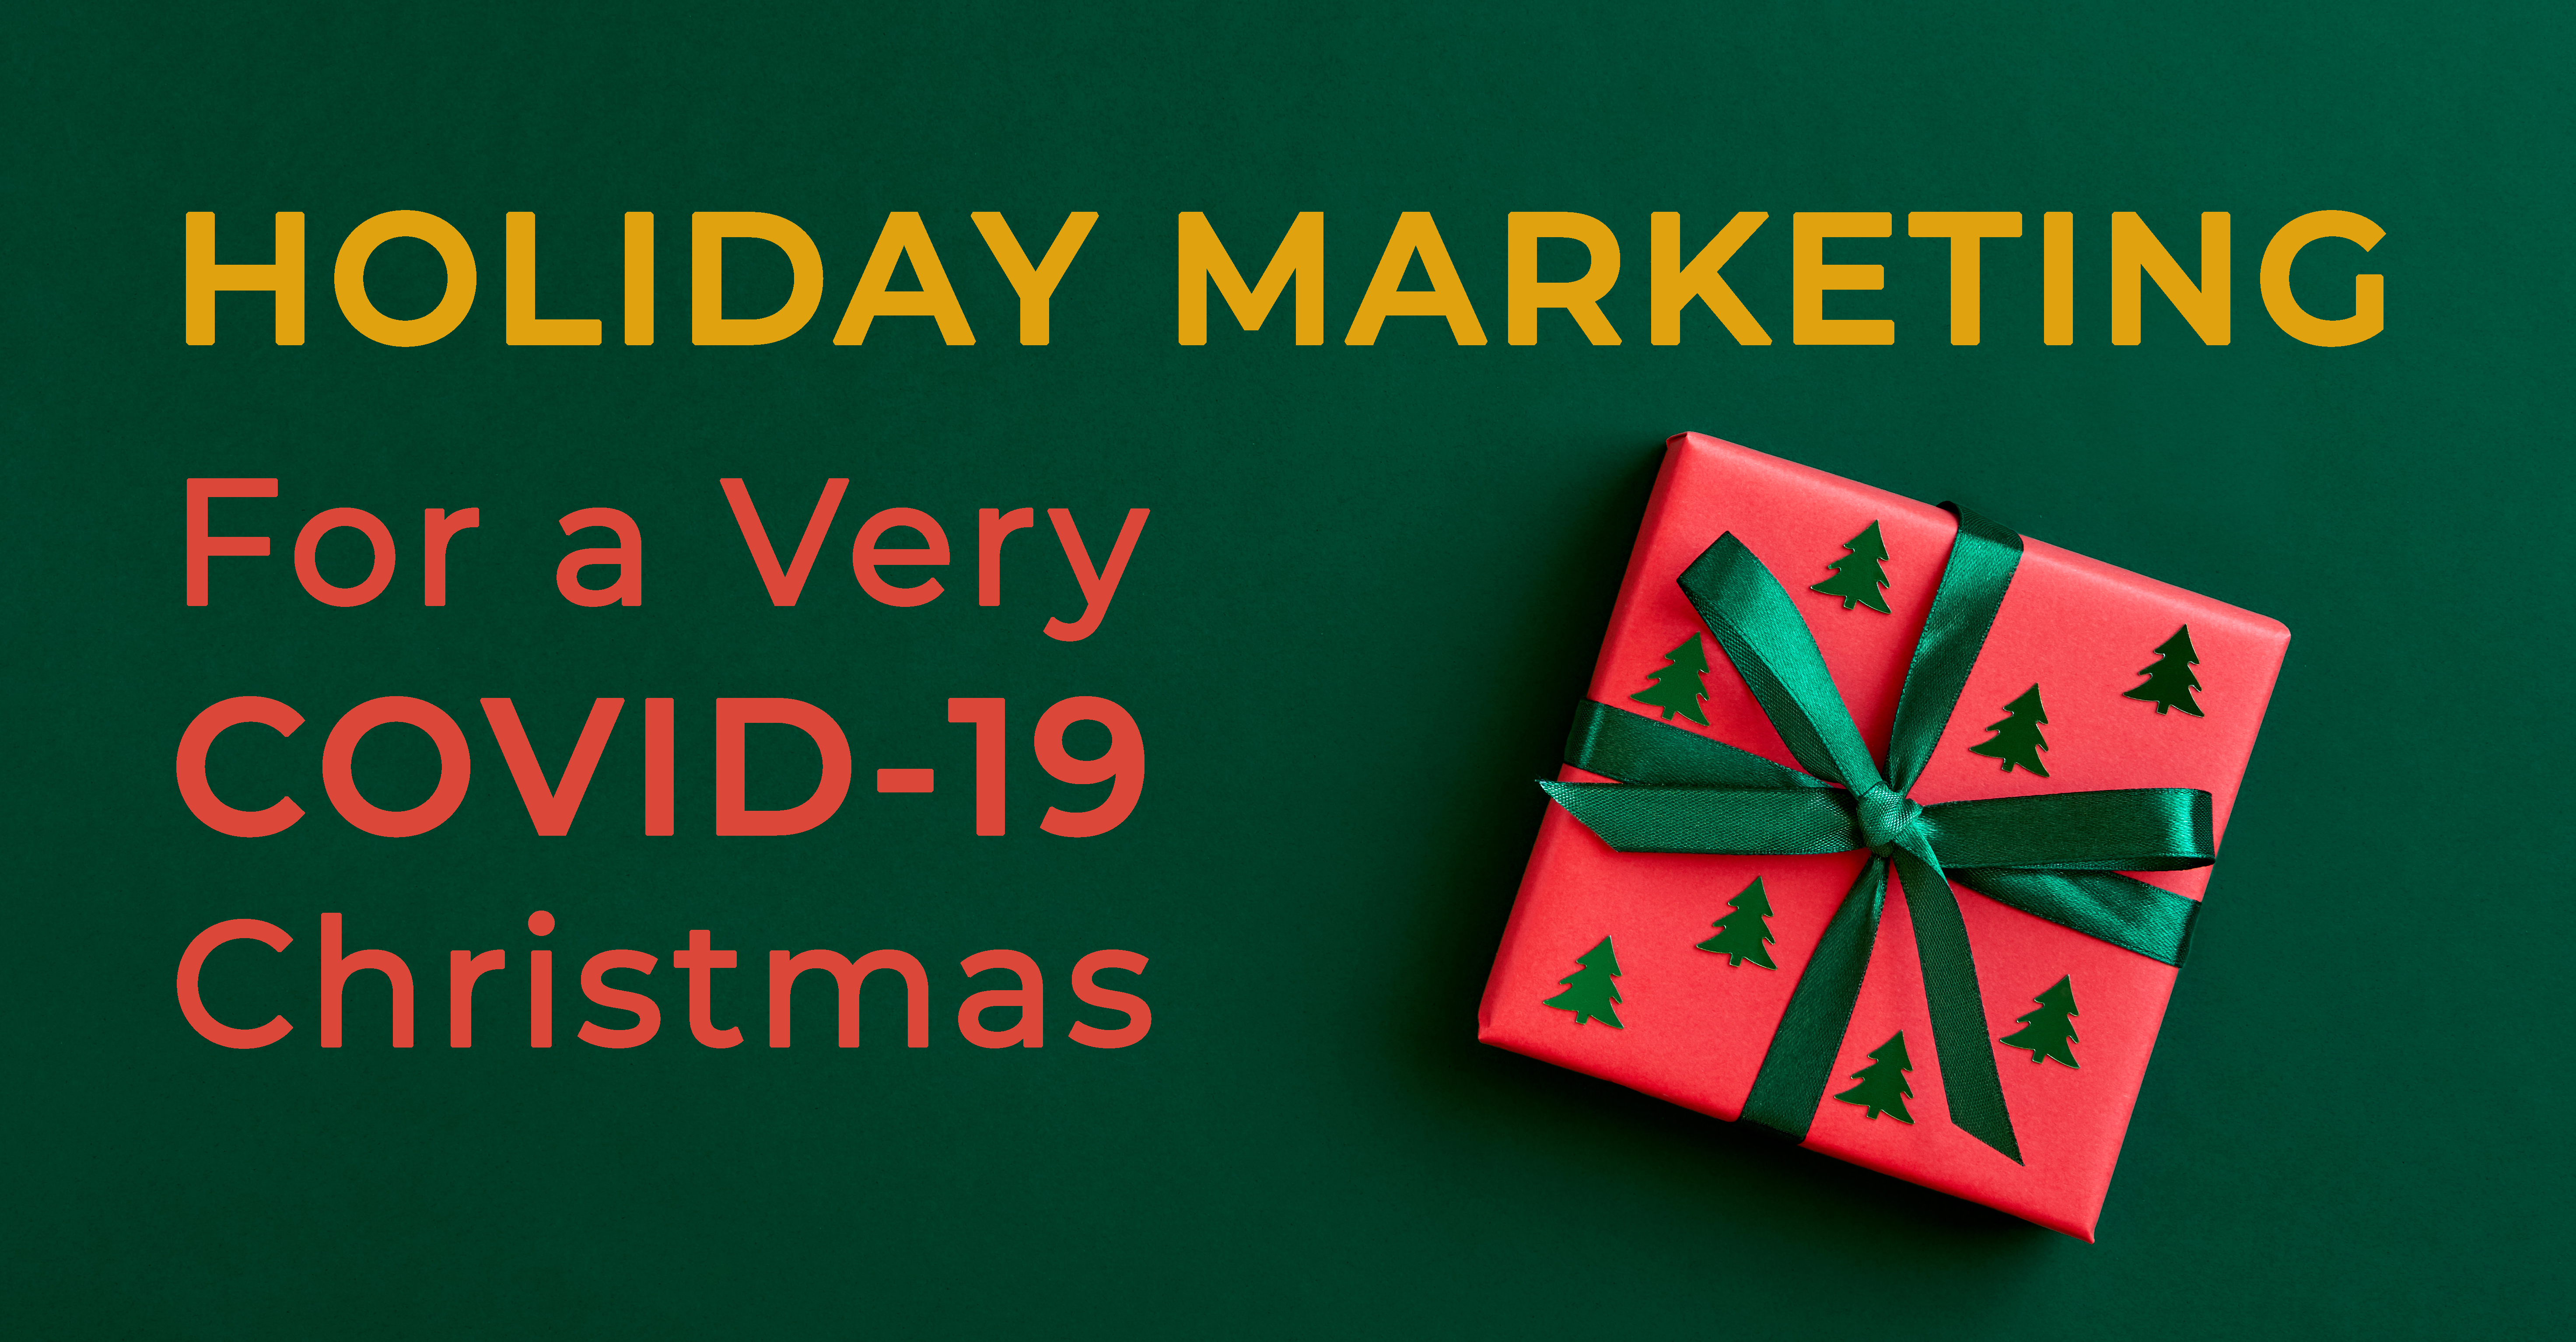 Holiday Marketing for a very COVID-19 Christmas